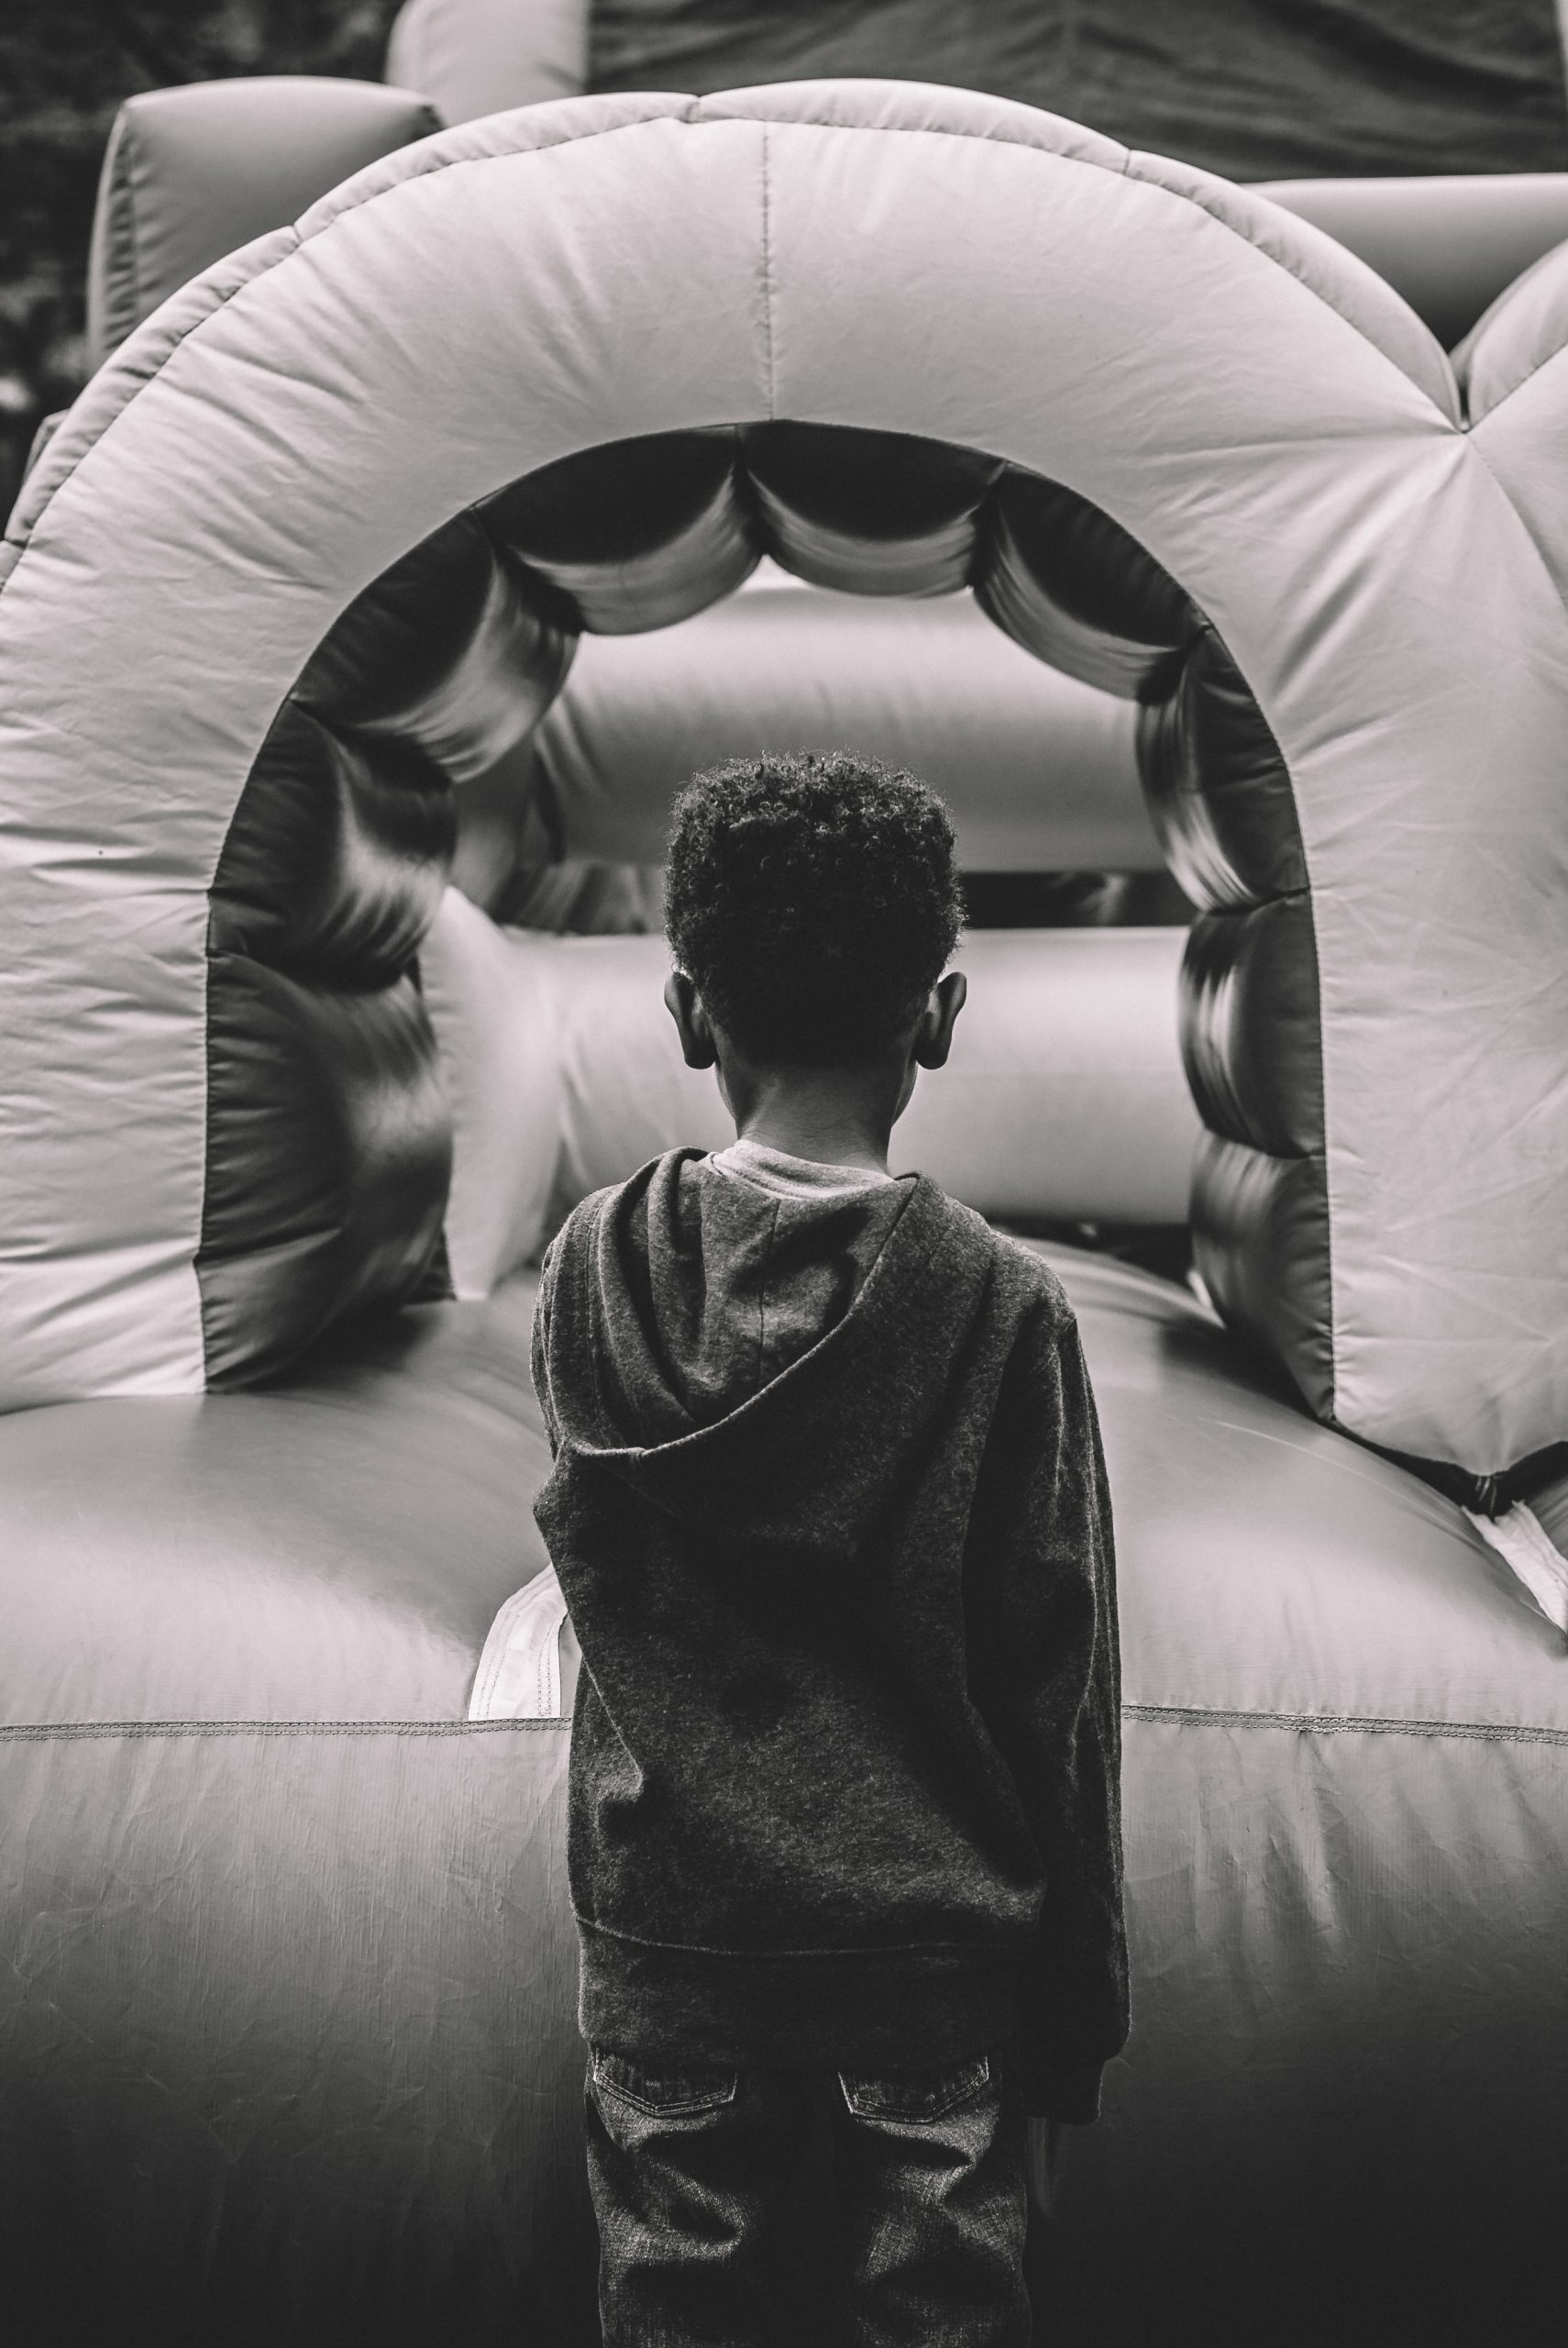 Bounce house rental in Indianapolis